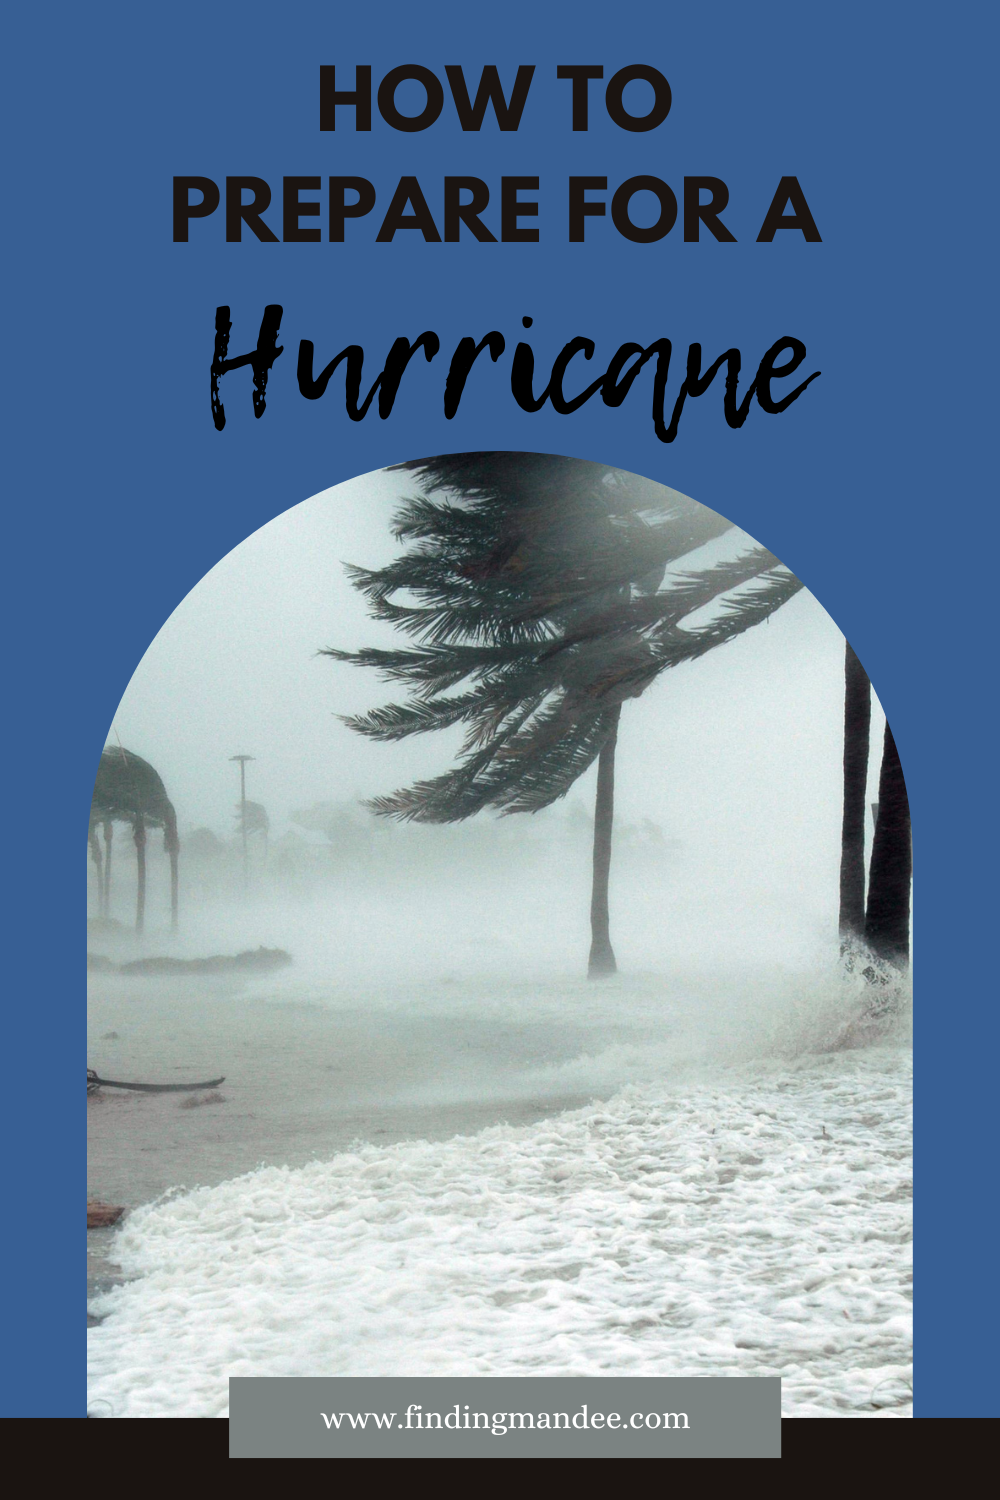 How to Prepare for a Hurricane | Finding Mandee